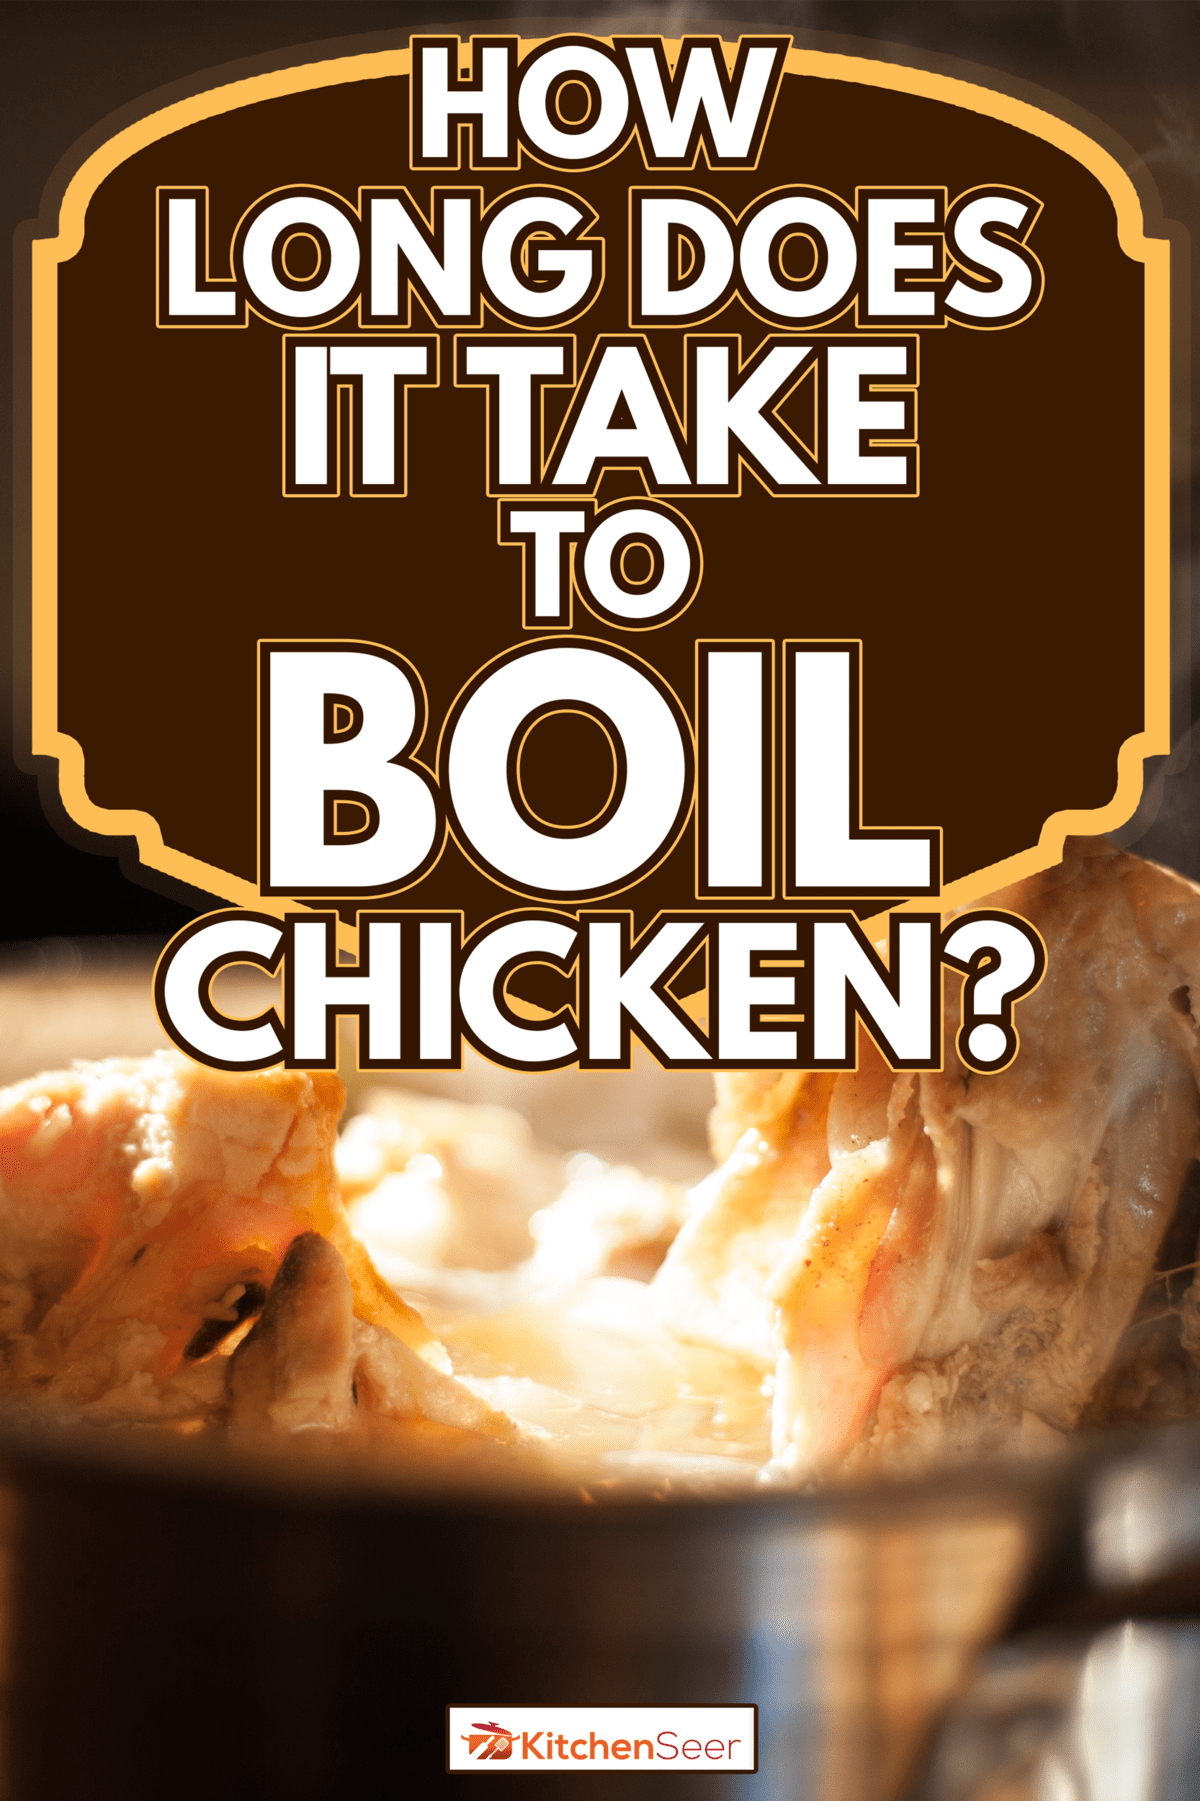 Boiling Chicken - How Long Does It Take To Boil Chicken